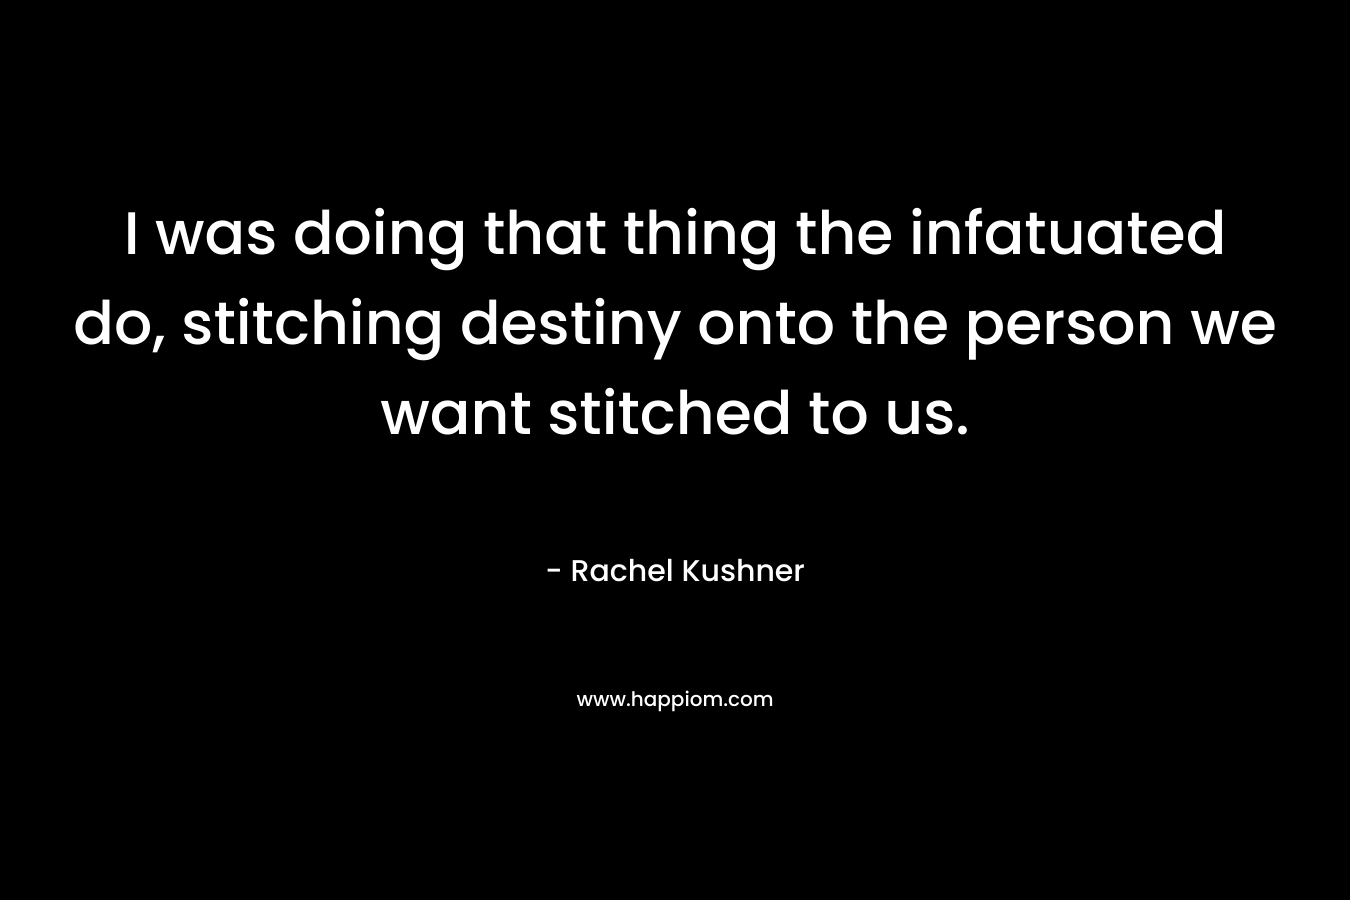 I was doing that thing the infatuated do, stitching destiny onto the person we want stitched to us. – Rachel Kushner